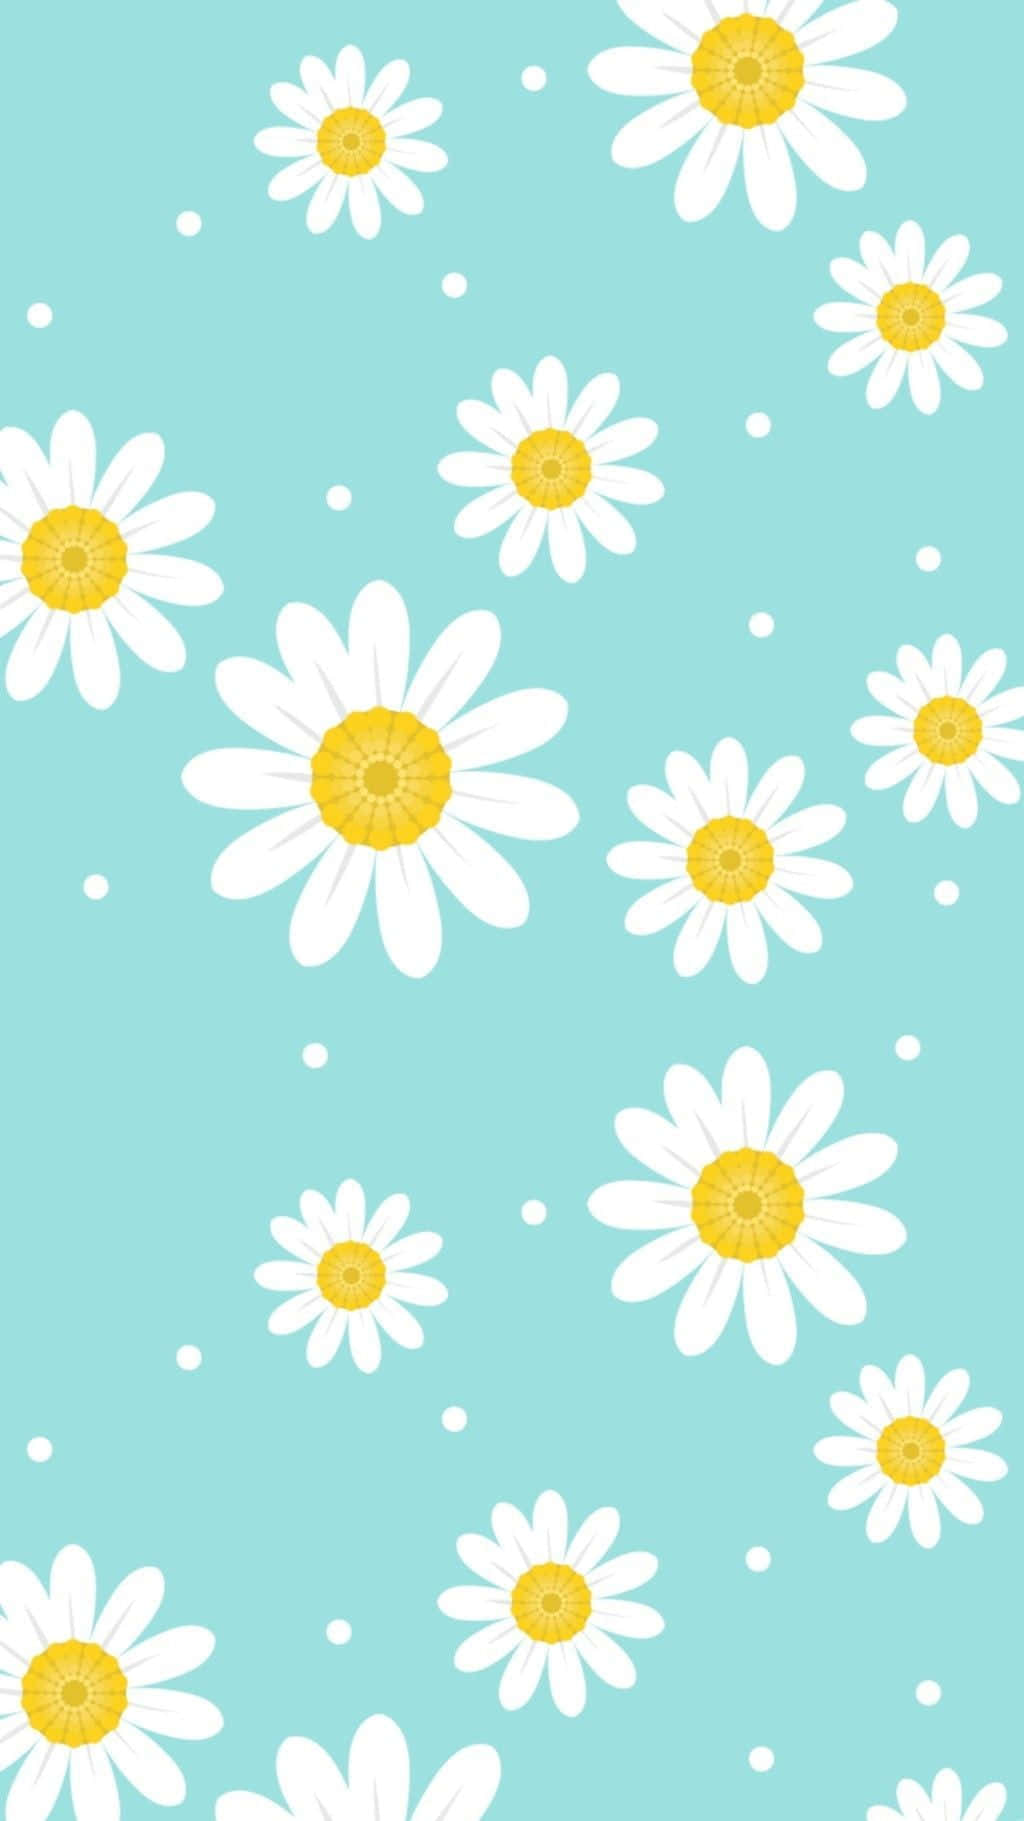 Cute and Colorful Kawaii Flower with a Smiling Face Wallpaper